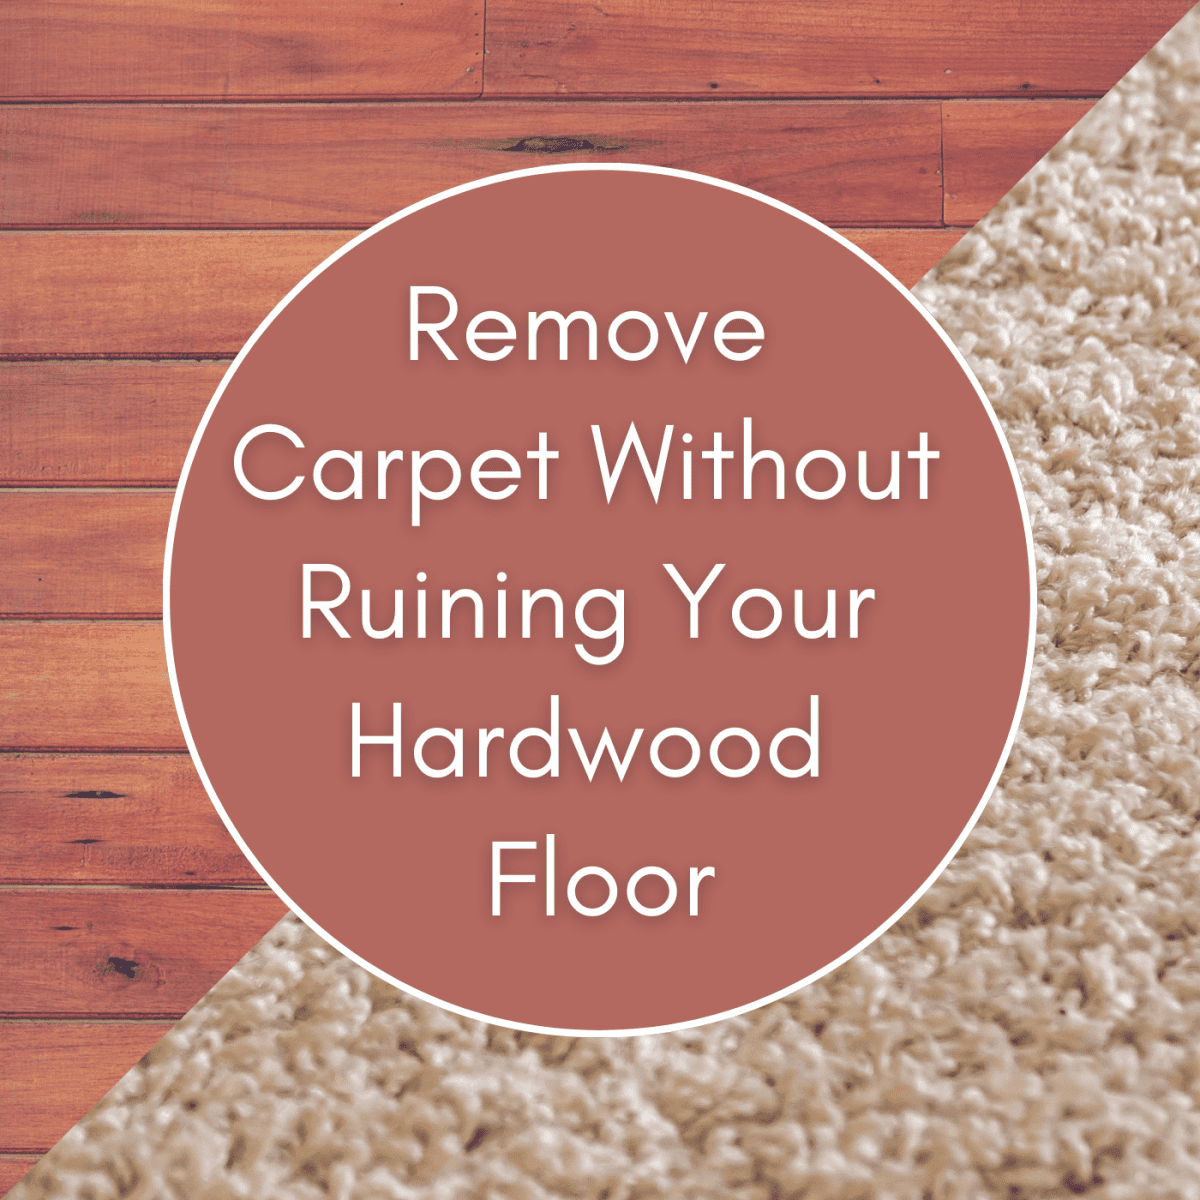 How To Remove Carpet Without Ruining, How To Remove Carpet Stains From Hardwood Floors